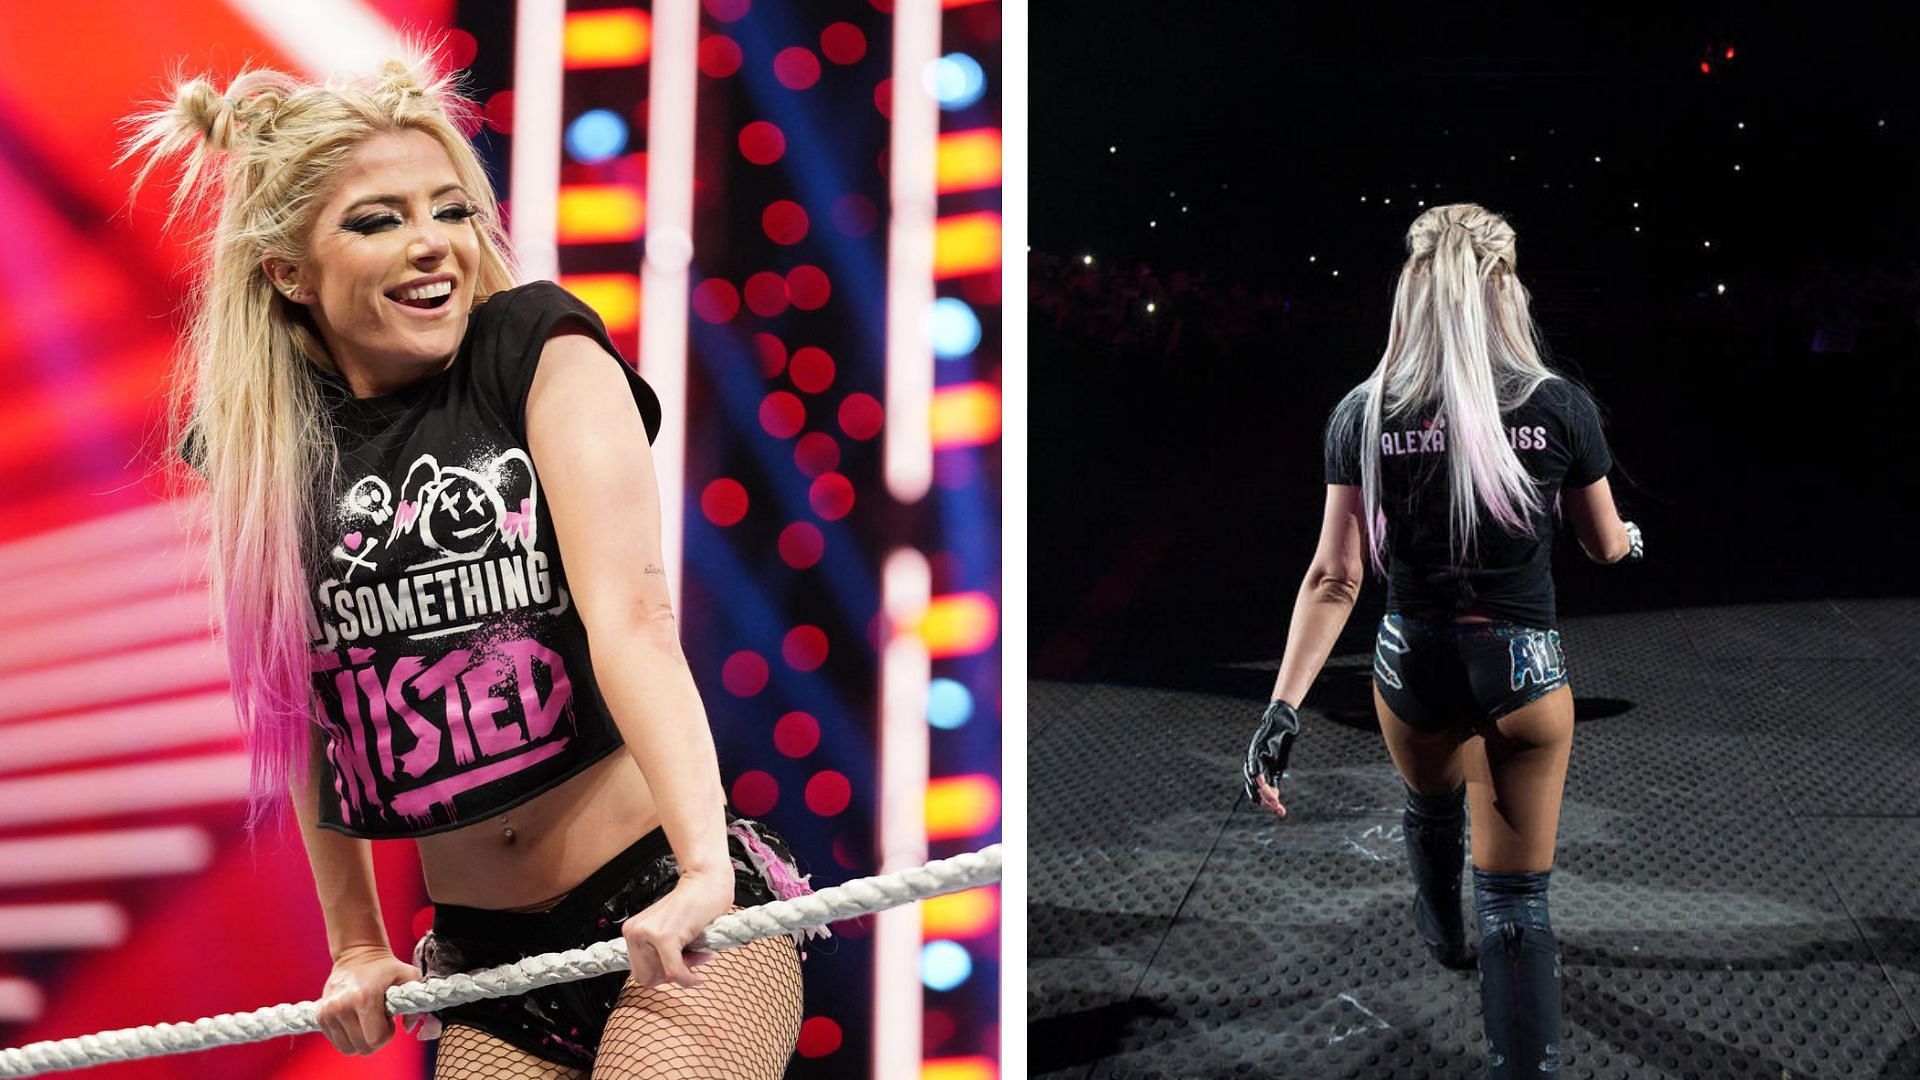 It has been a year since Alexa Bliss